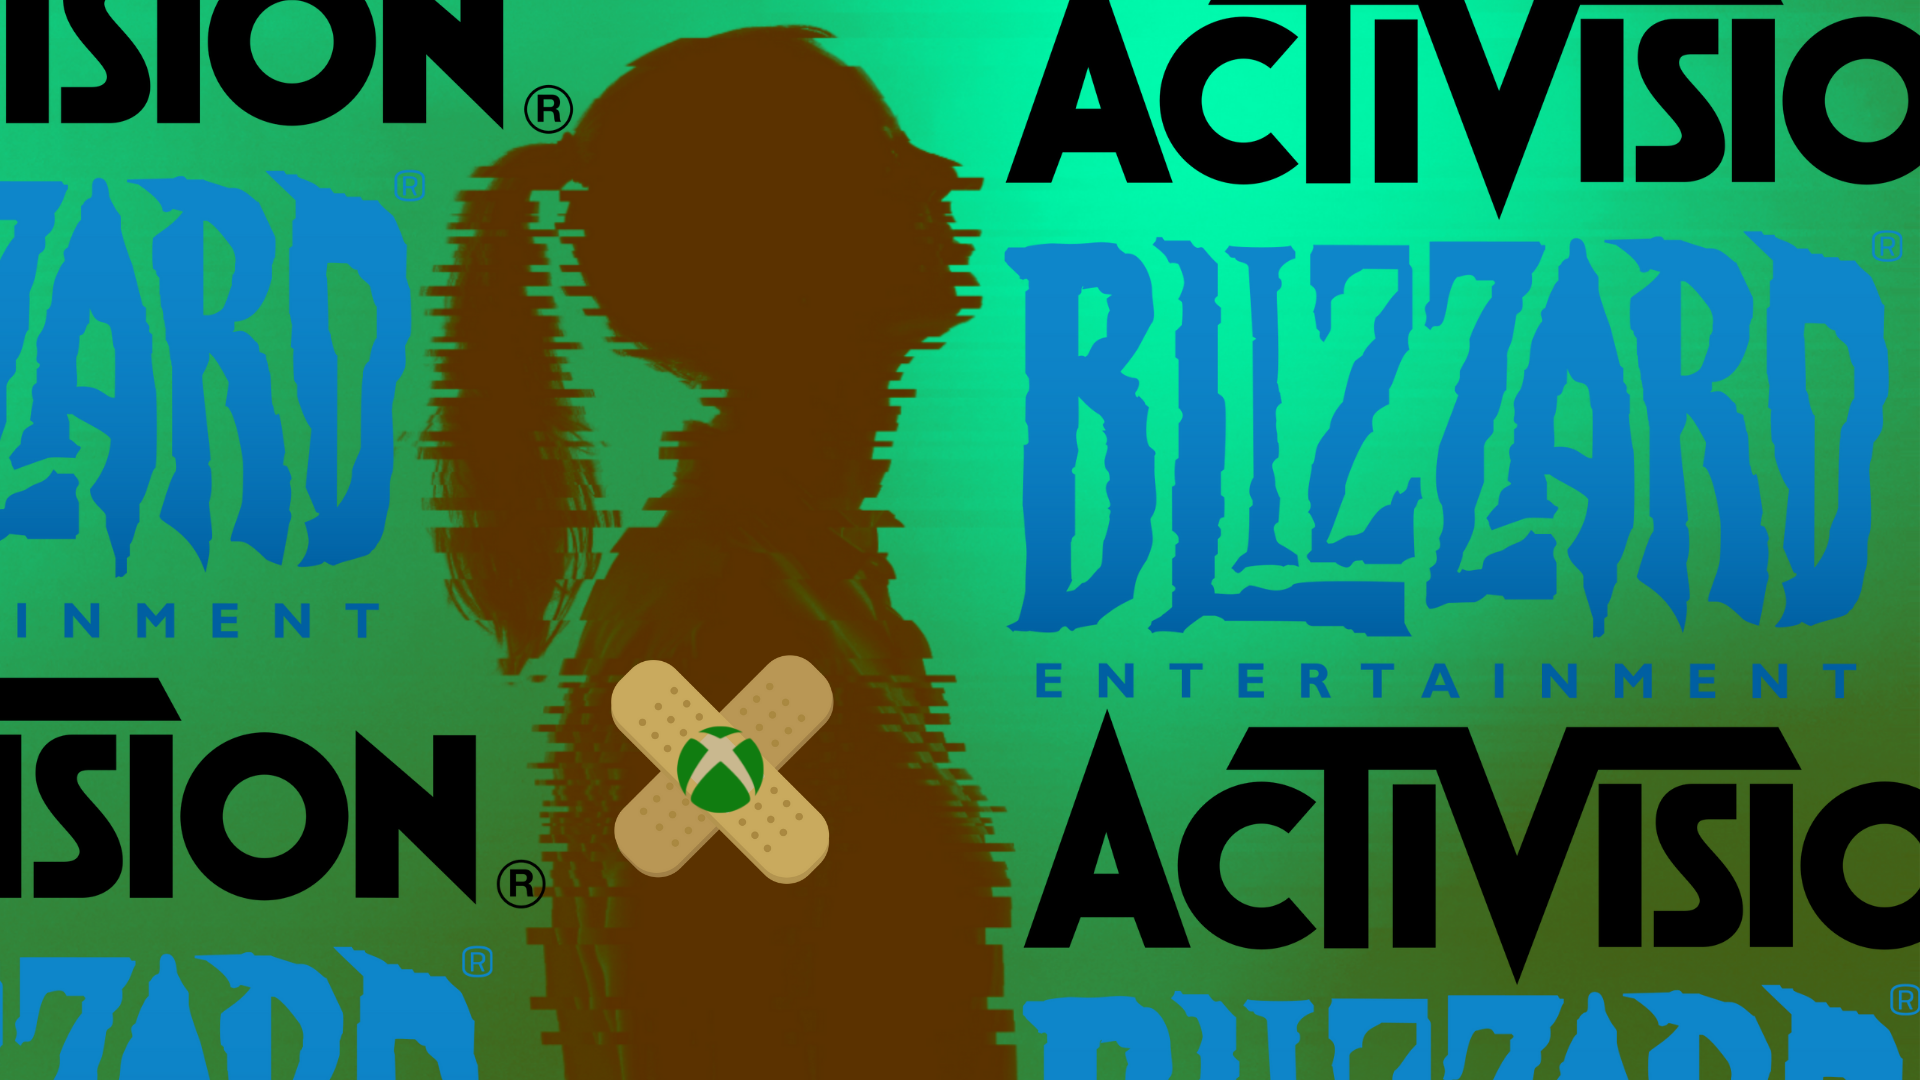 Microsoft's Activision Blizzard purchase will reportedly be